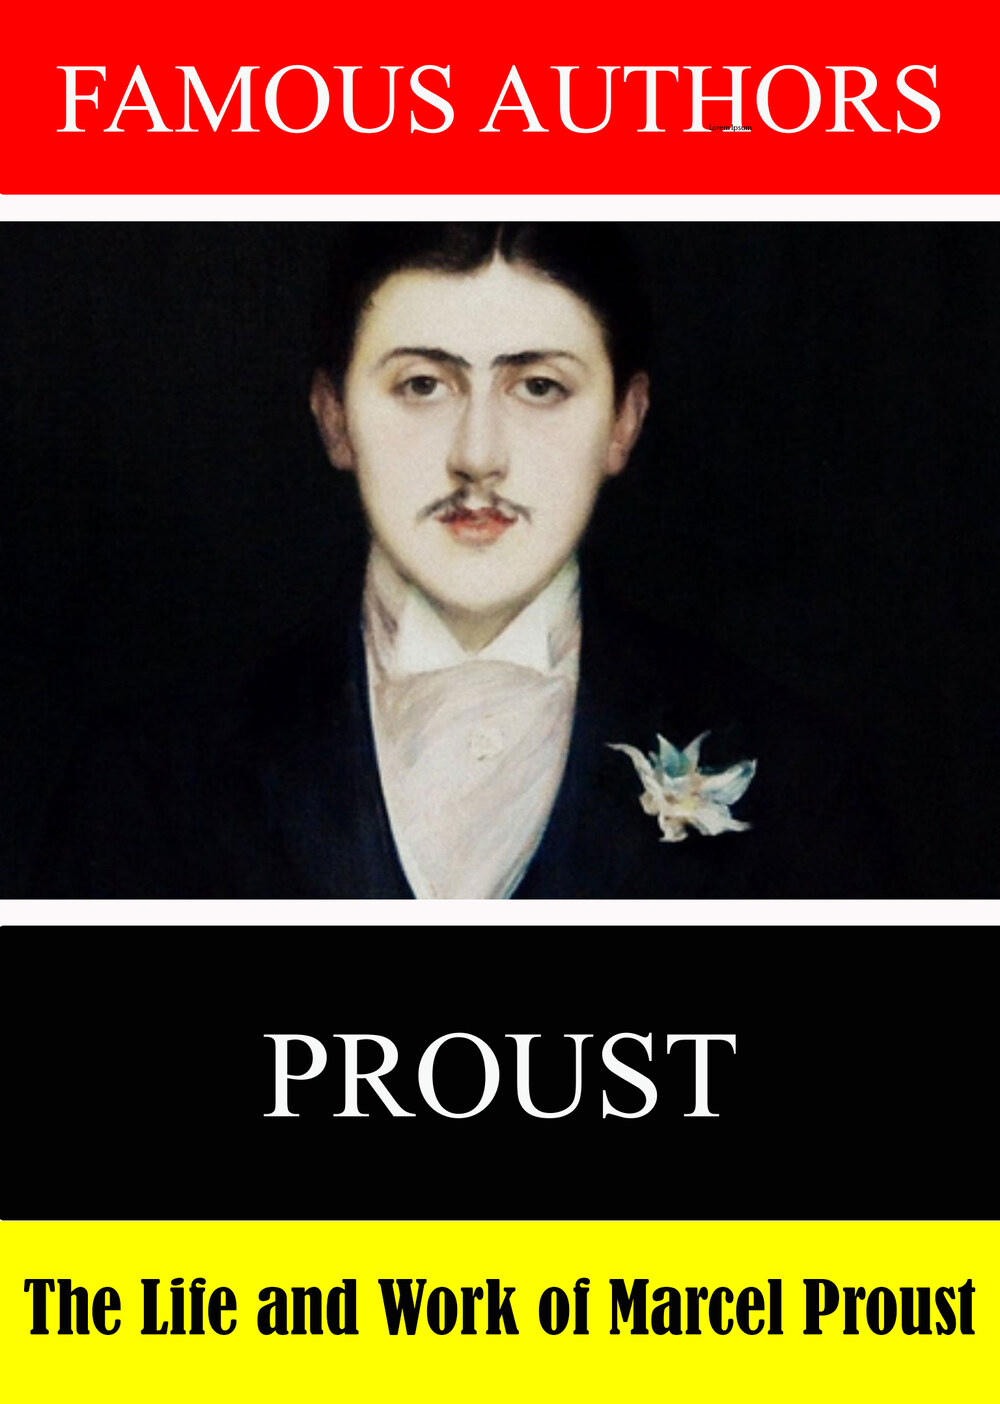 L7901 - Famous Authors: The Life and Work of  Marcel Proust